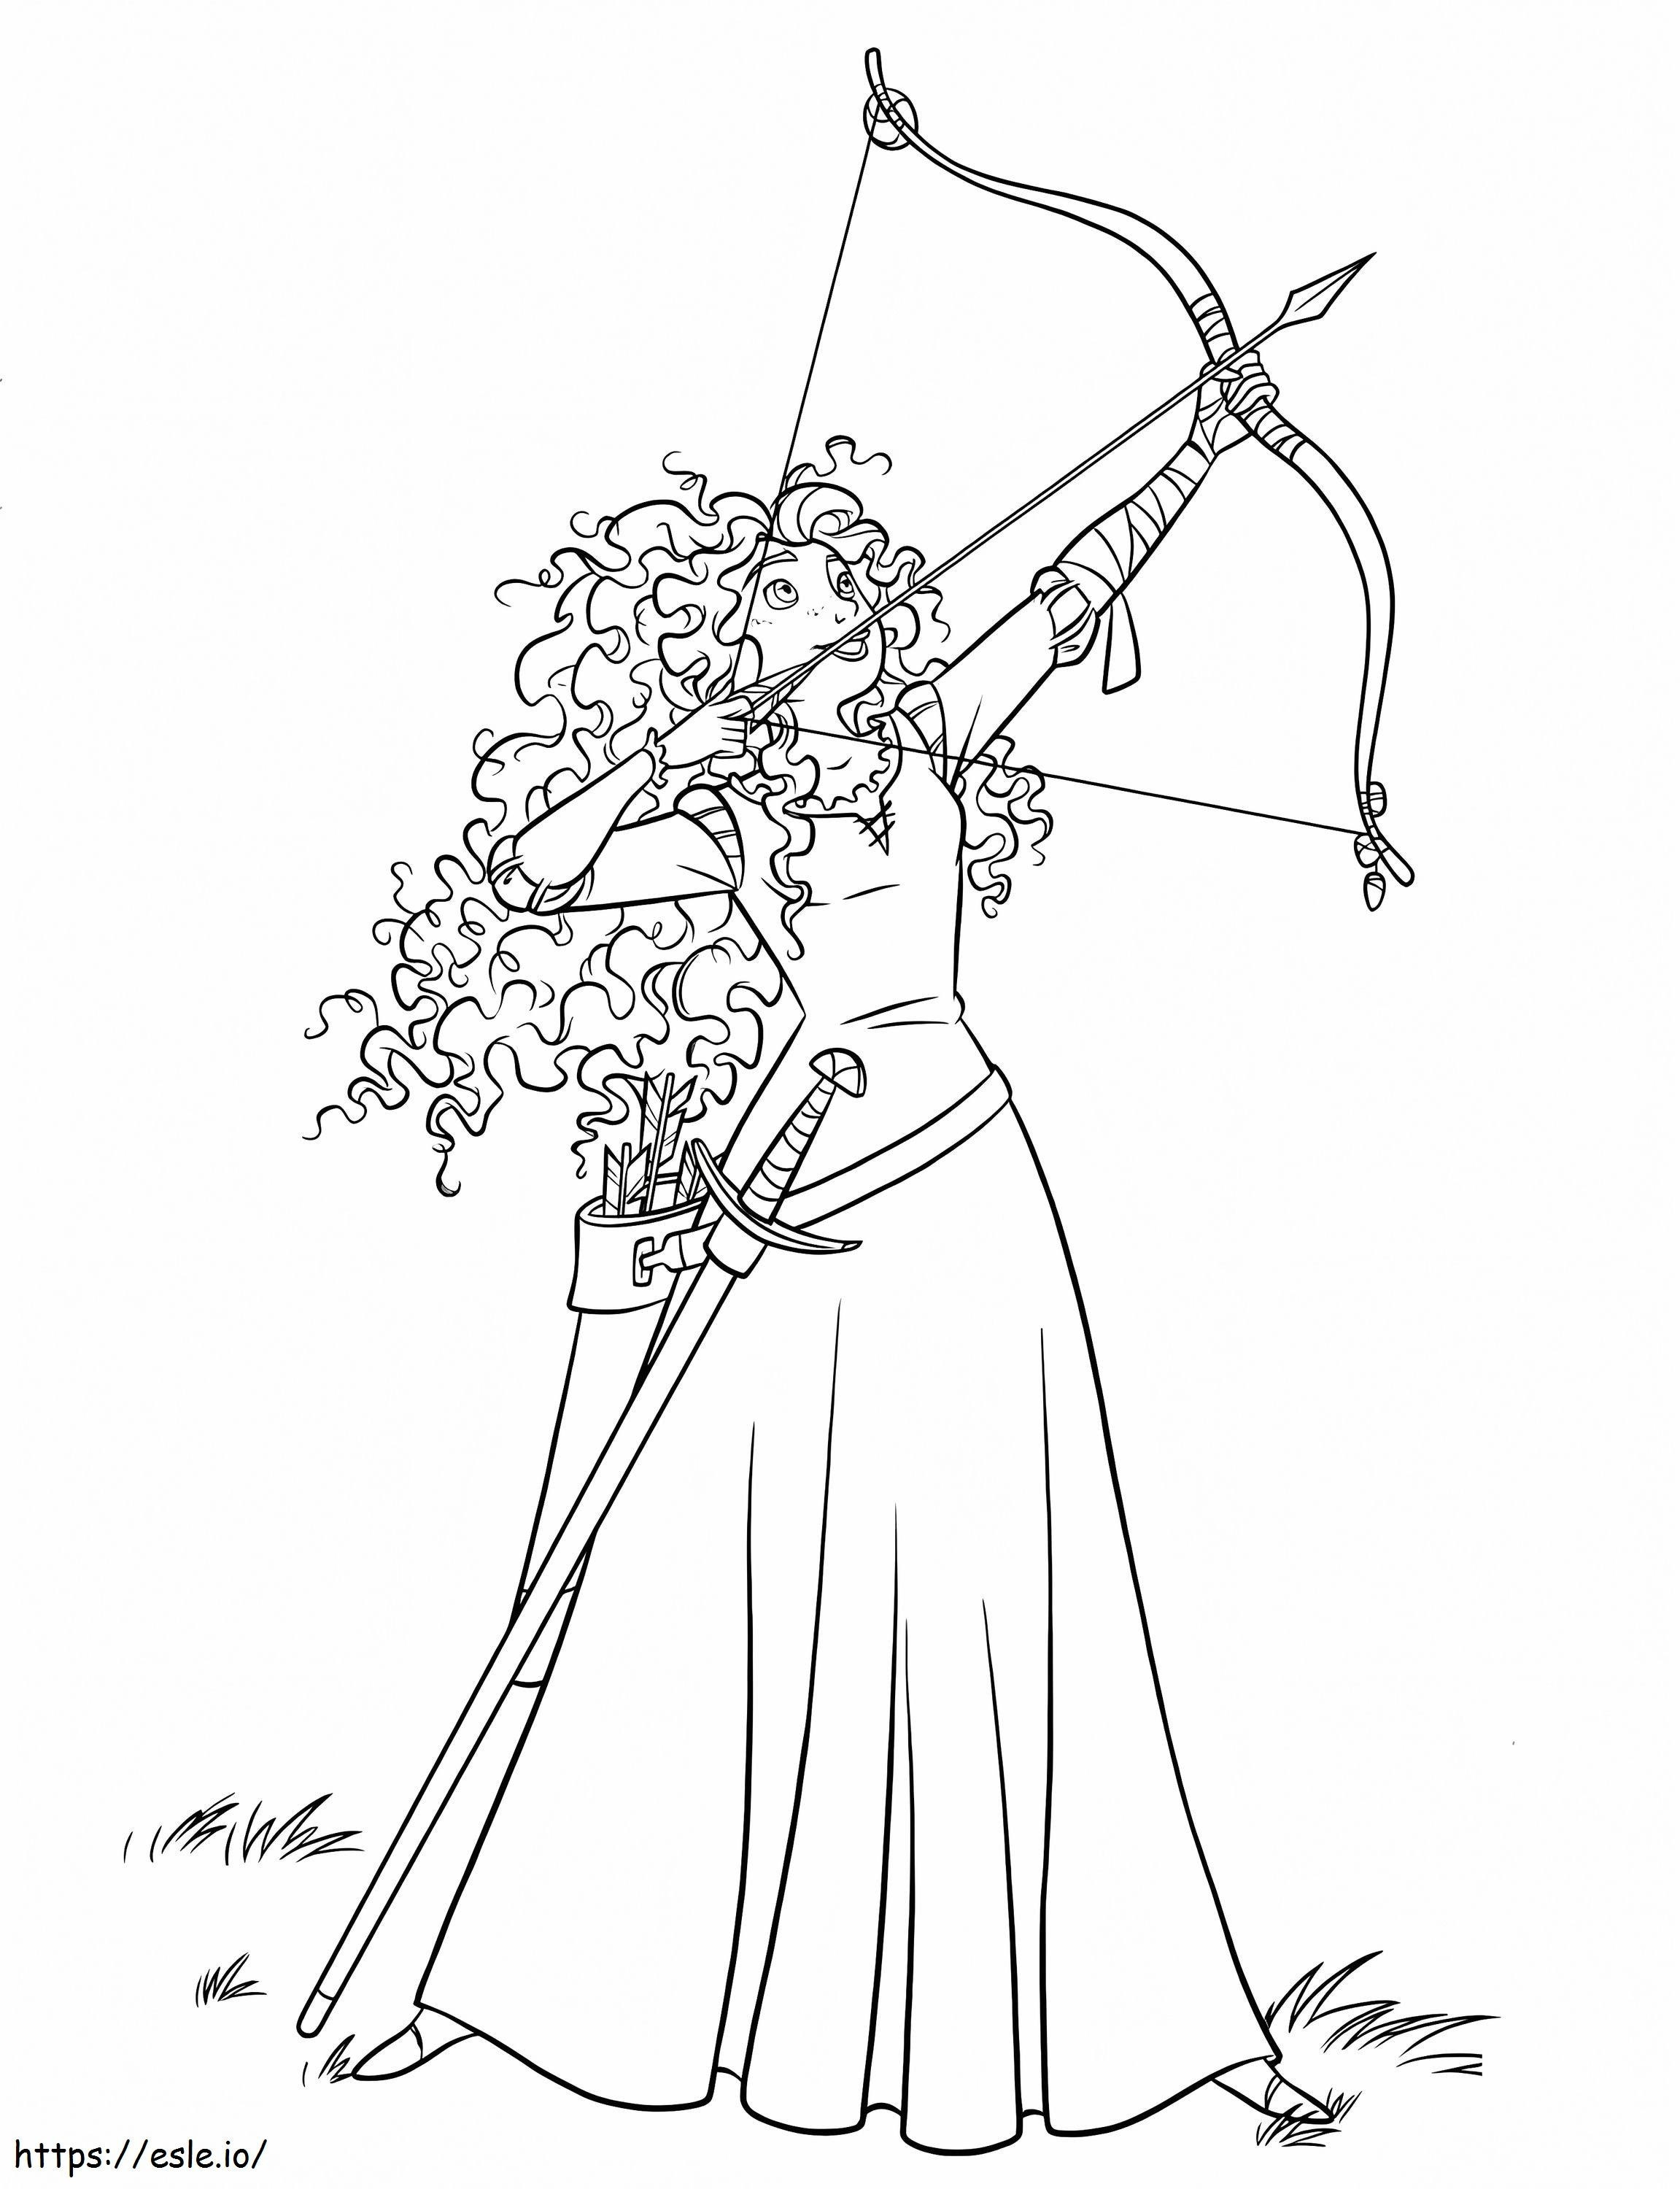 Princess Merida With Bow And Arrow 2 coloring page